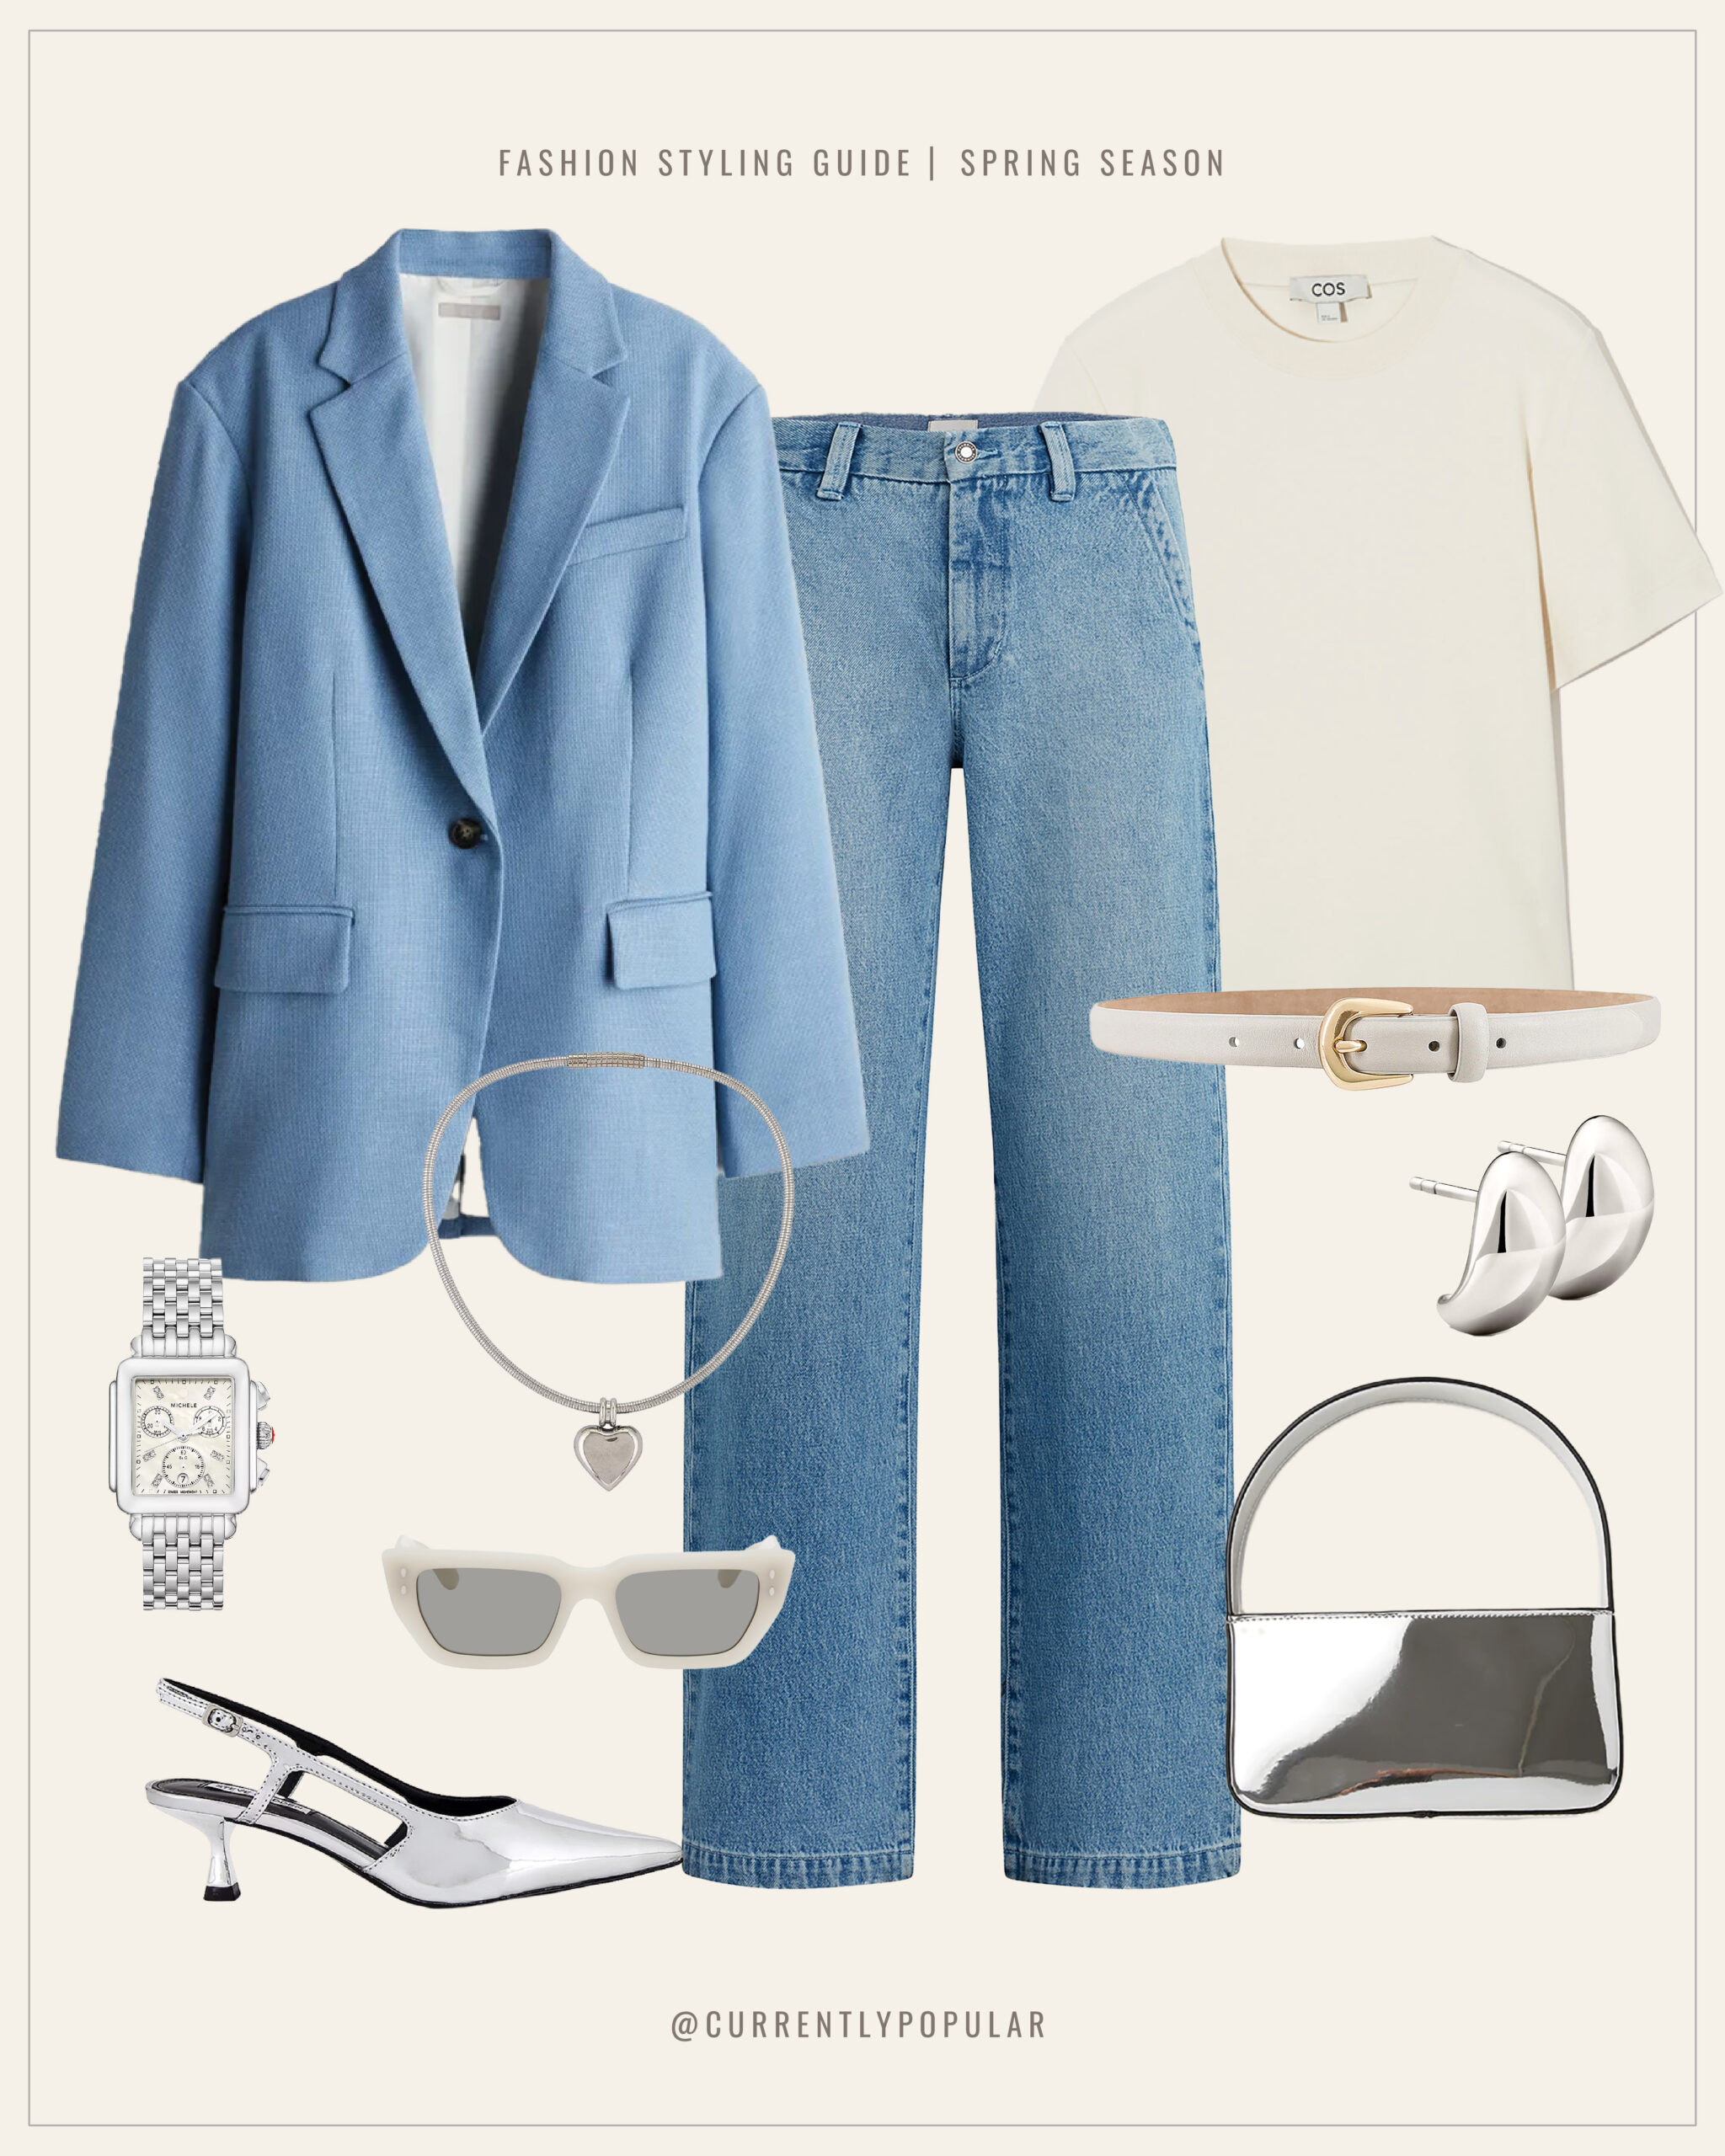 Fashion styling guide for the spring season, featuring a light blue blazer over a classic white T-shirt paired with mid-wash blue jeans. The ensemble is accessorized with a chic silver watch, a silver choker necklace with a heart pendant, white sunglasses with gray lenses, and white slingback heels with black details. A white belt and a silver mirrored half-moon handbag complete the look. The text '@currentlypopular' indicates the source of the fashion guide.